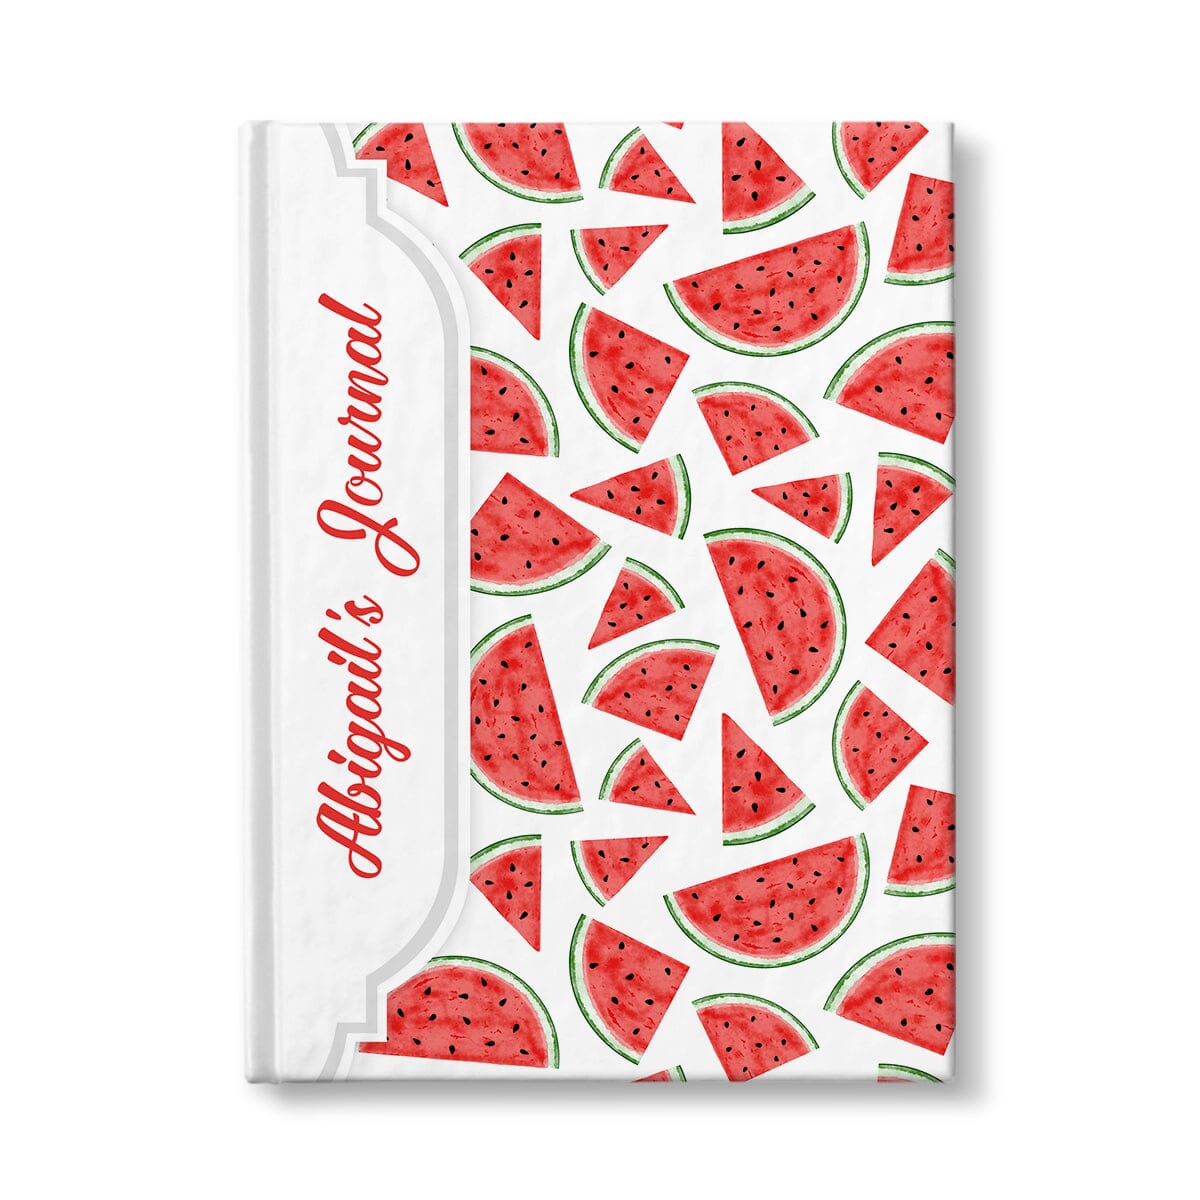 Personalized Watermelon Slices Journal at Artistically Invited.